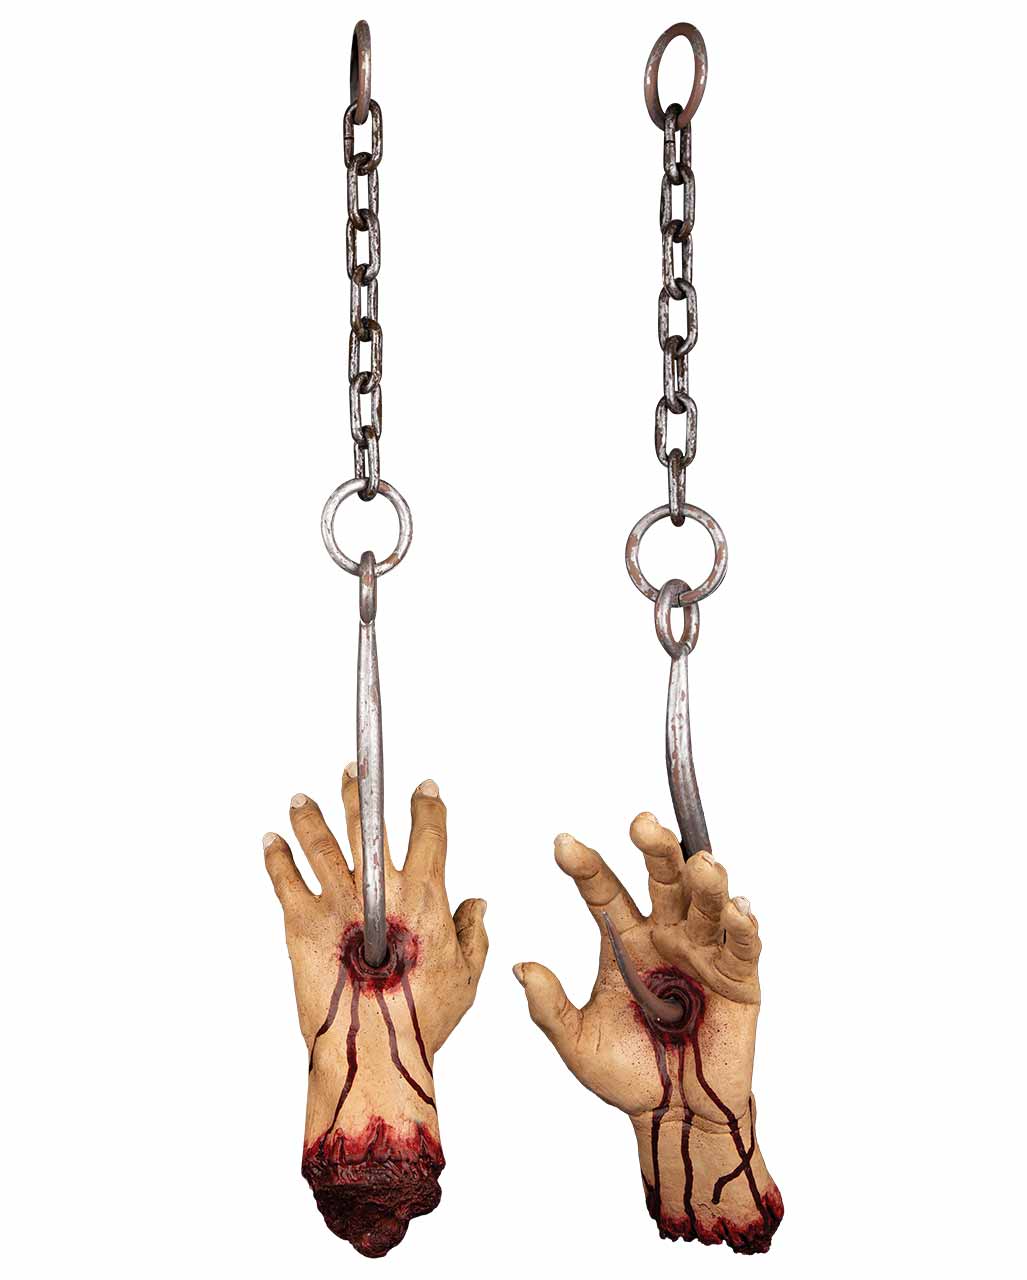 Separated Pair Of Hands On Meat Hook ☆